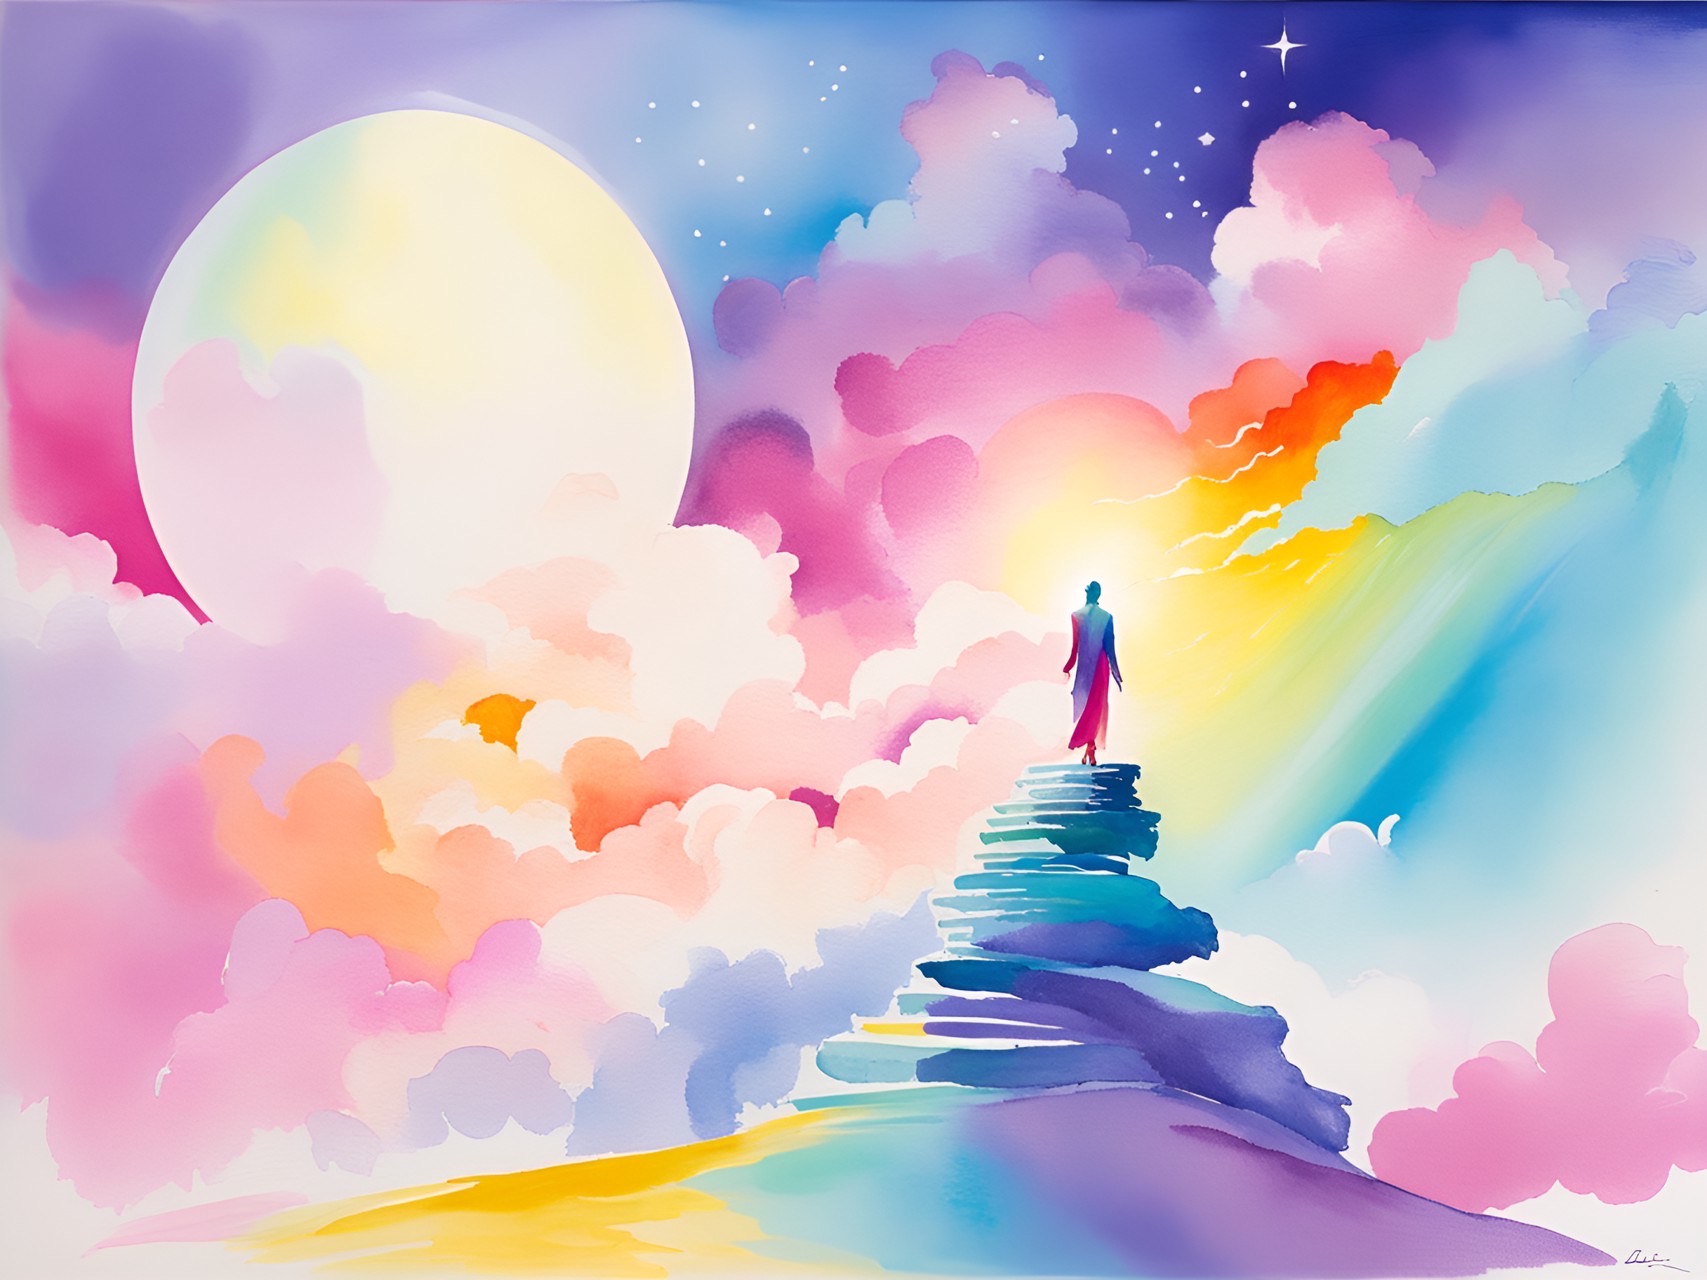 A solitary figure ascends a stairway of clouds towards a large, luminous moon amidst a vibrant and colorful dreamy sky.